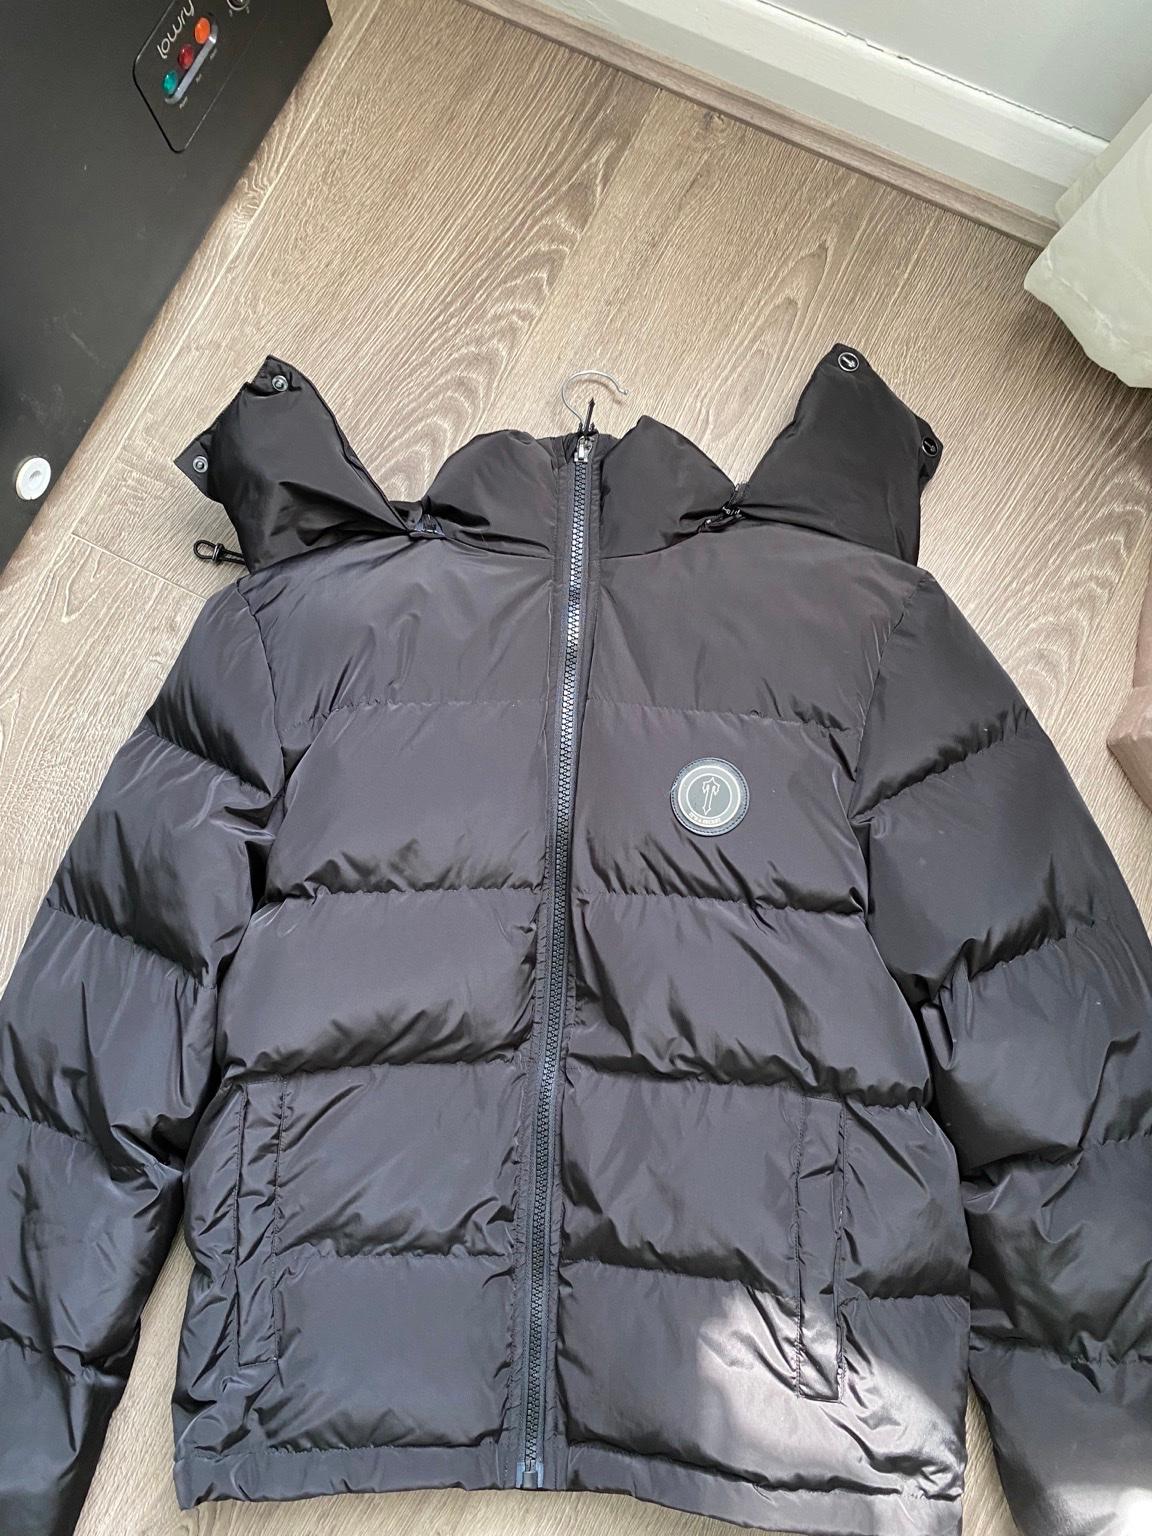 Trapstar Irongate Blackout Edition Jacket in SW11 London Borough of ...